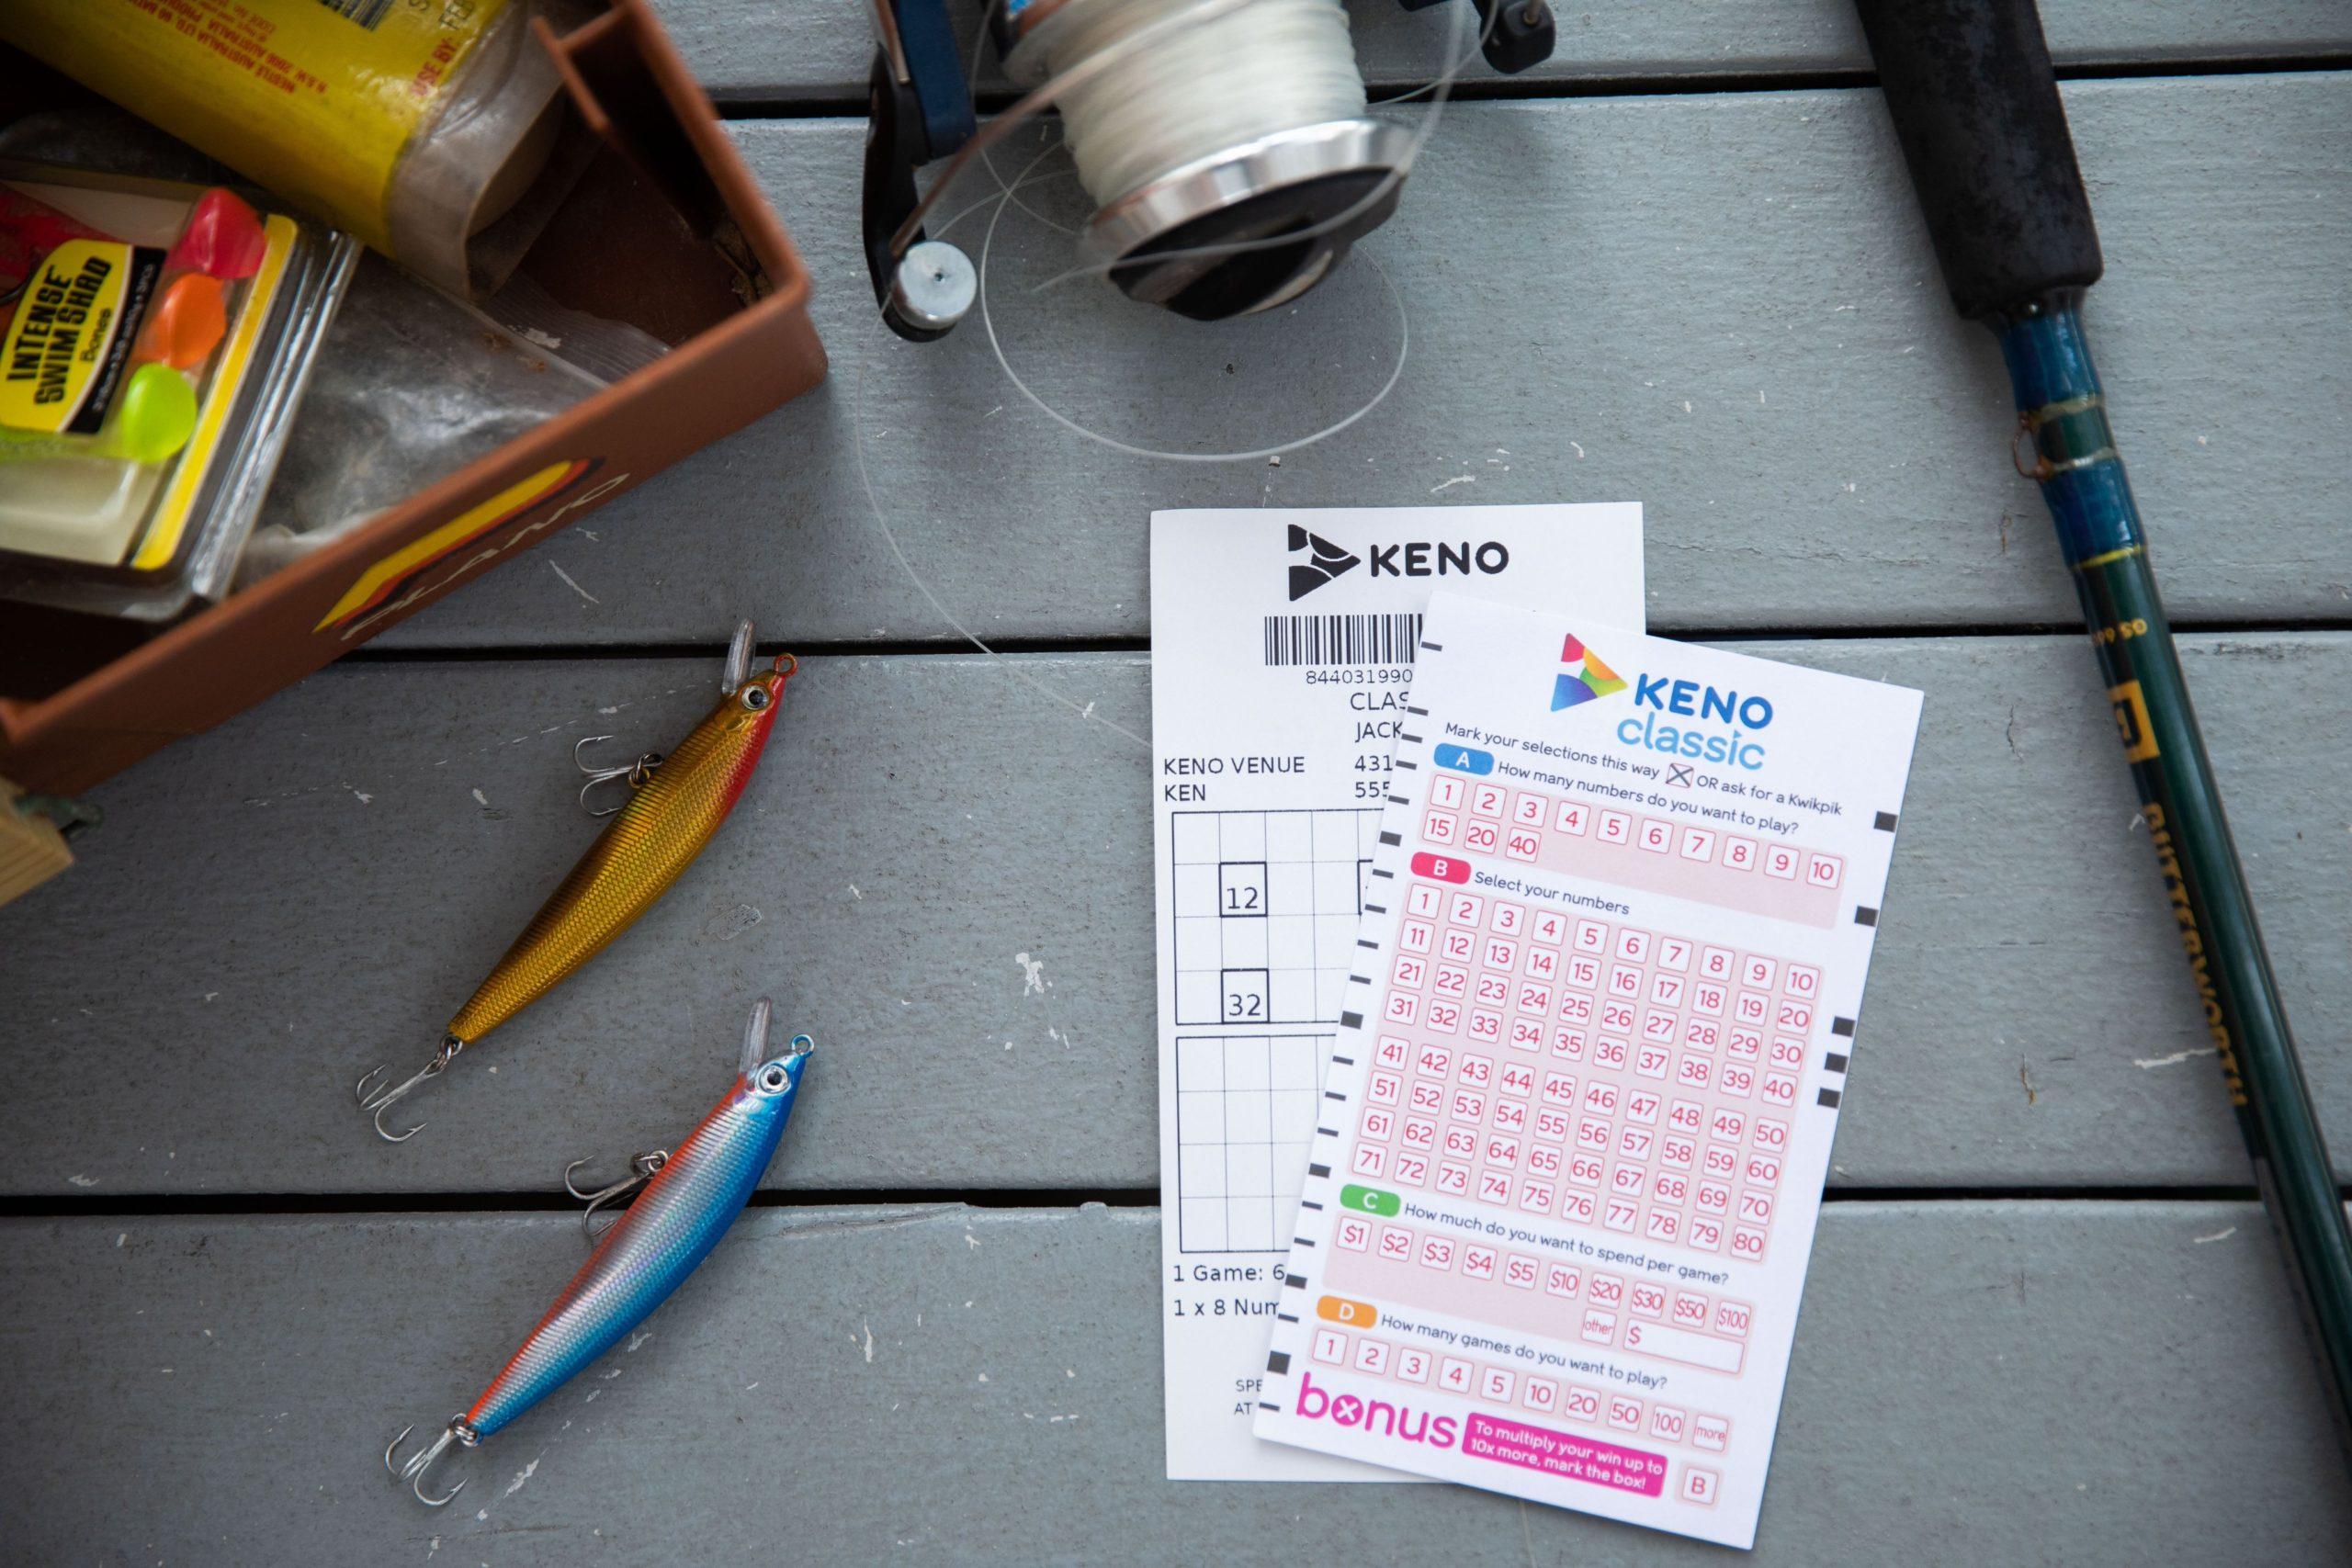 How To Pick My Choice Of Keno Numbers In Australia?